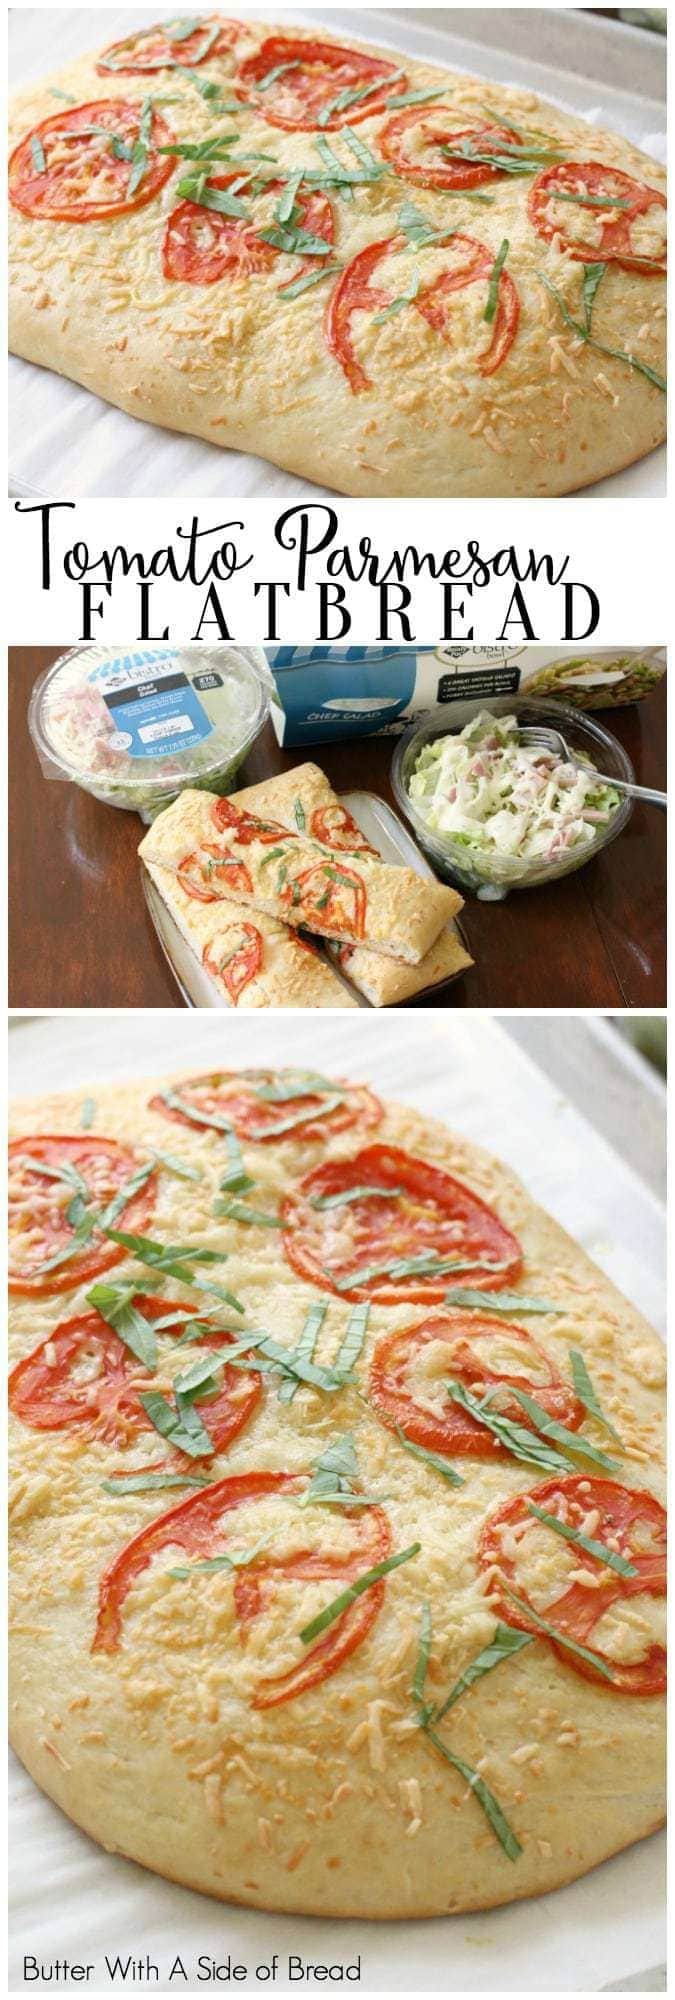 Tomato Parmesan Flatbread recipe made from scratch and topped with fresh tomato, basil and Parmesan cheese. Soft & flavorful homemade flatbread to go alongside dinner.